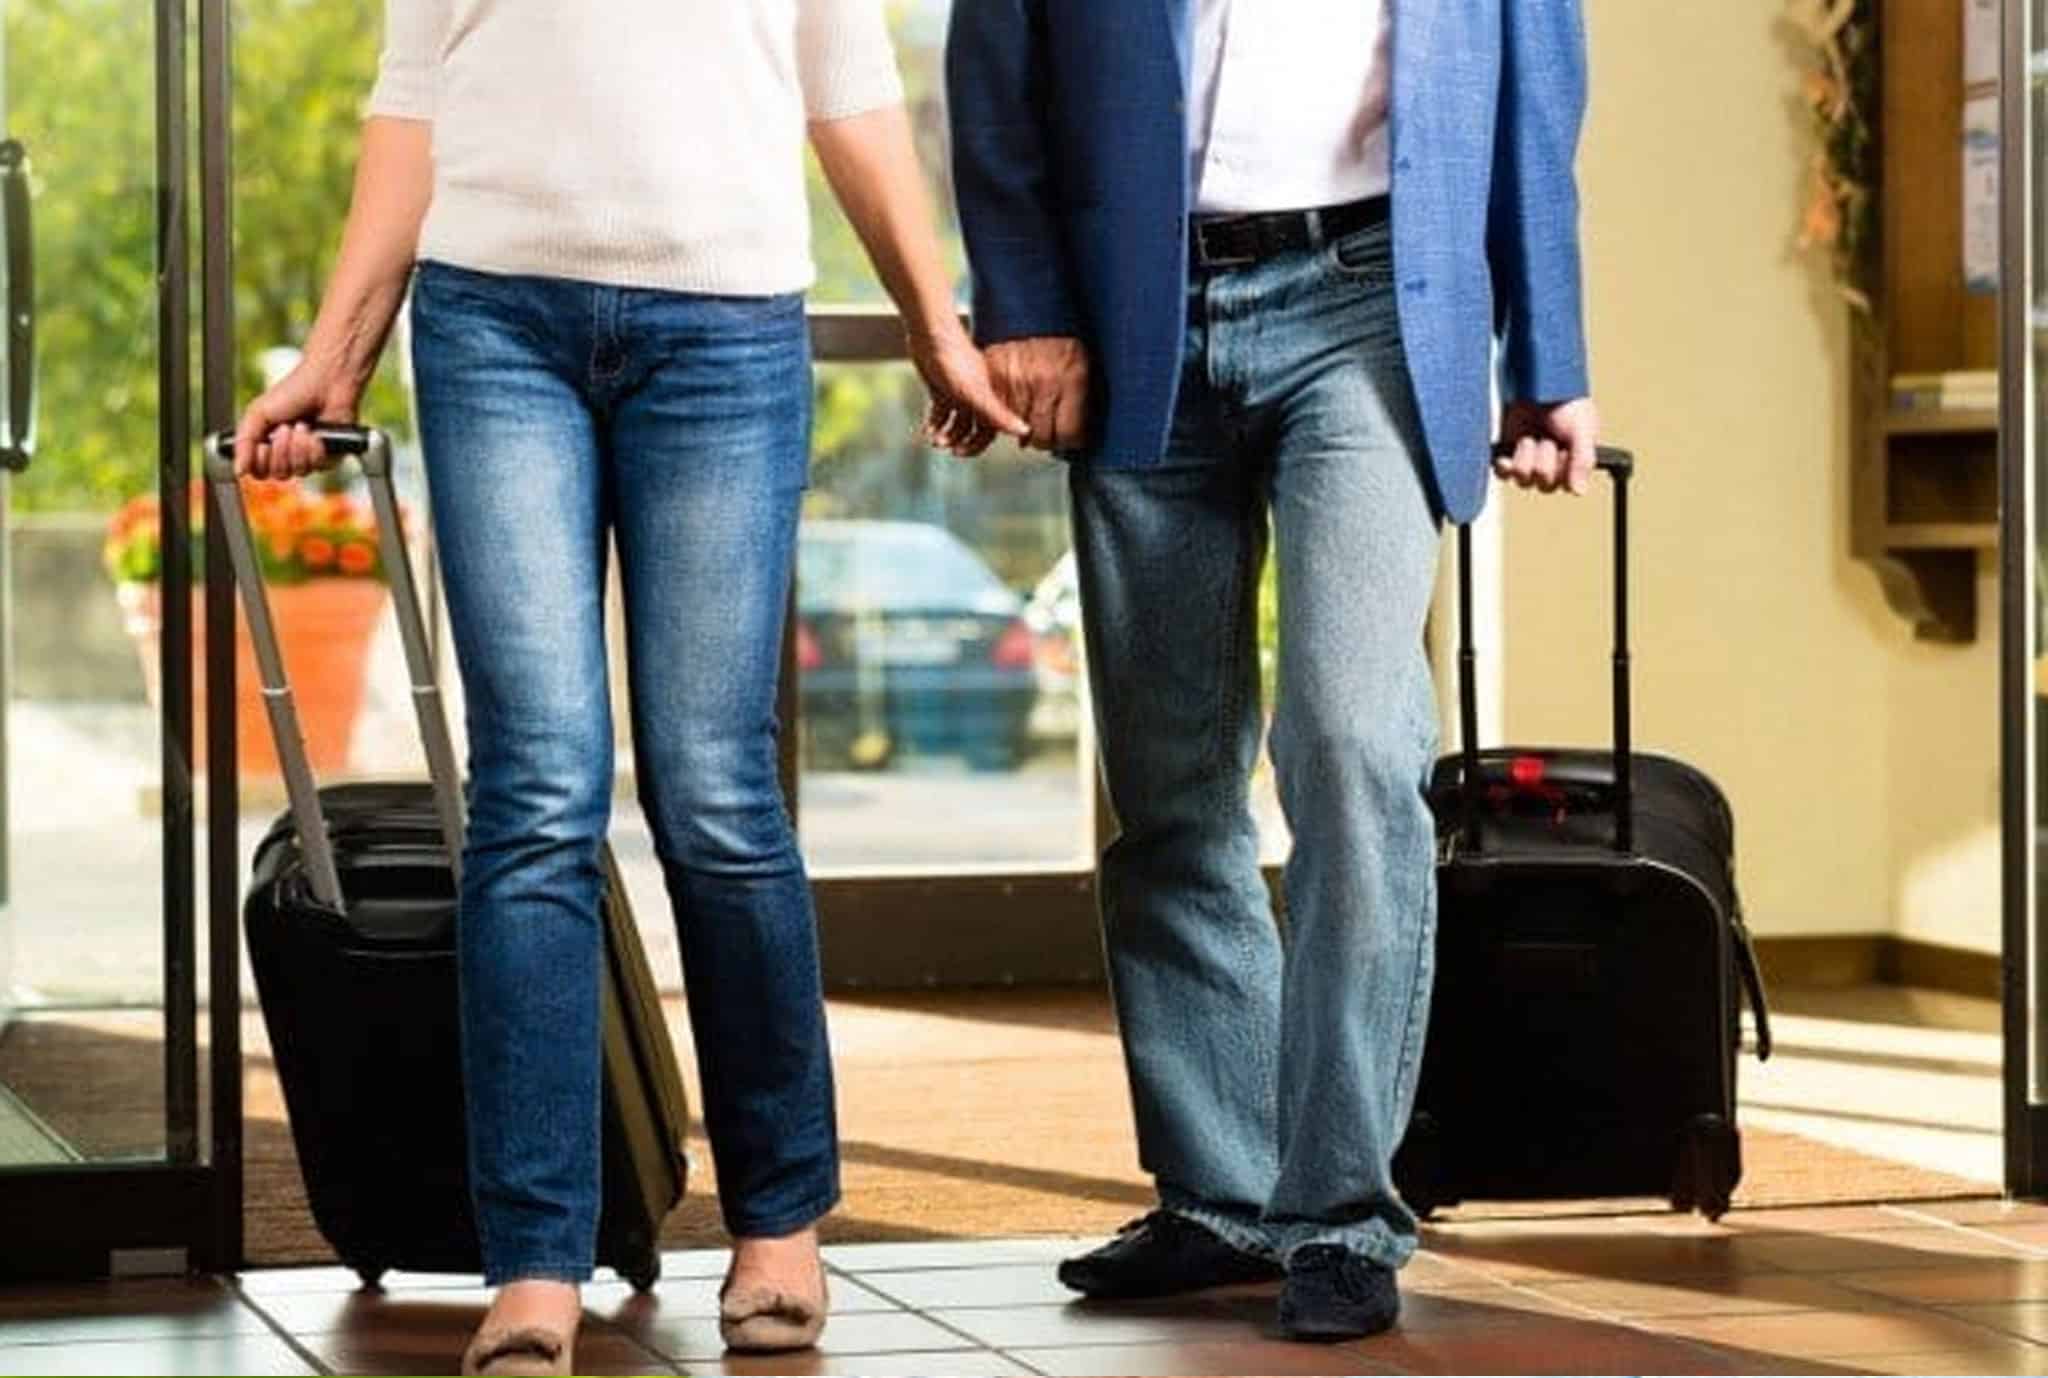 couple walking into a hotel lobby with roller luggage